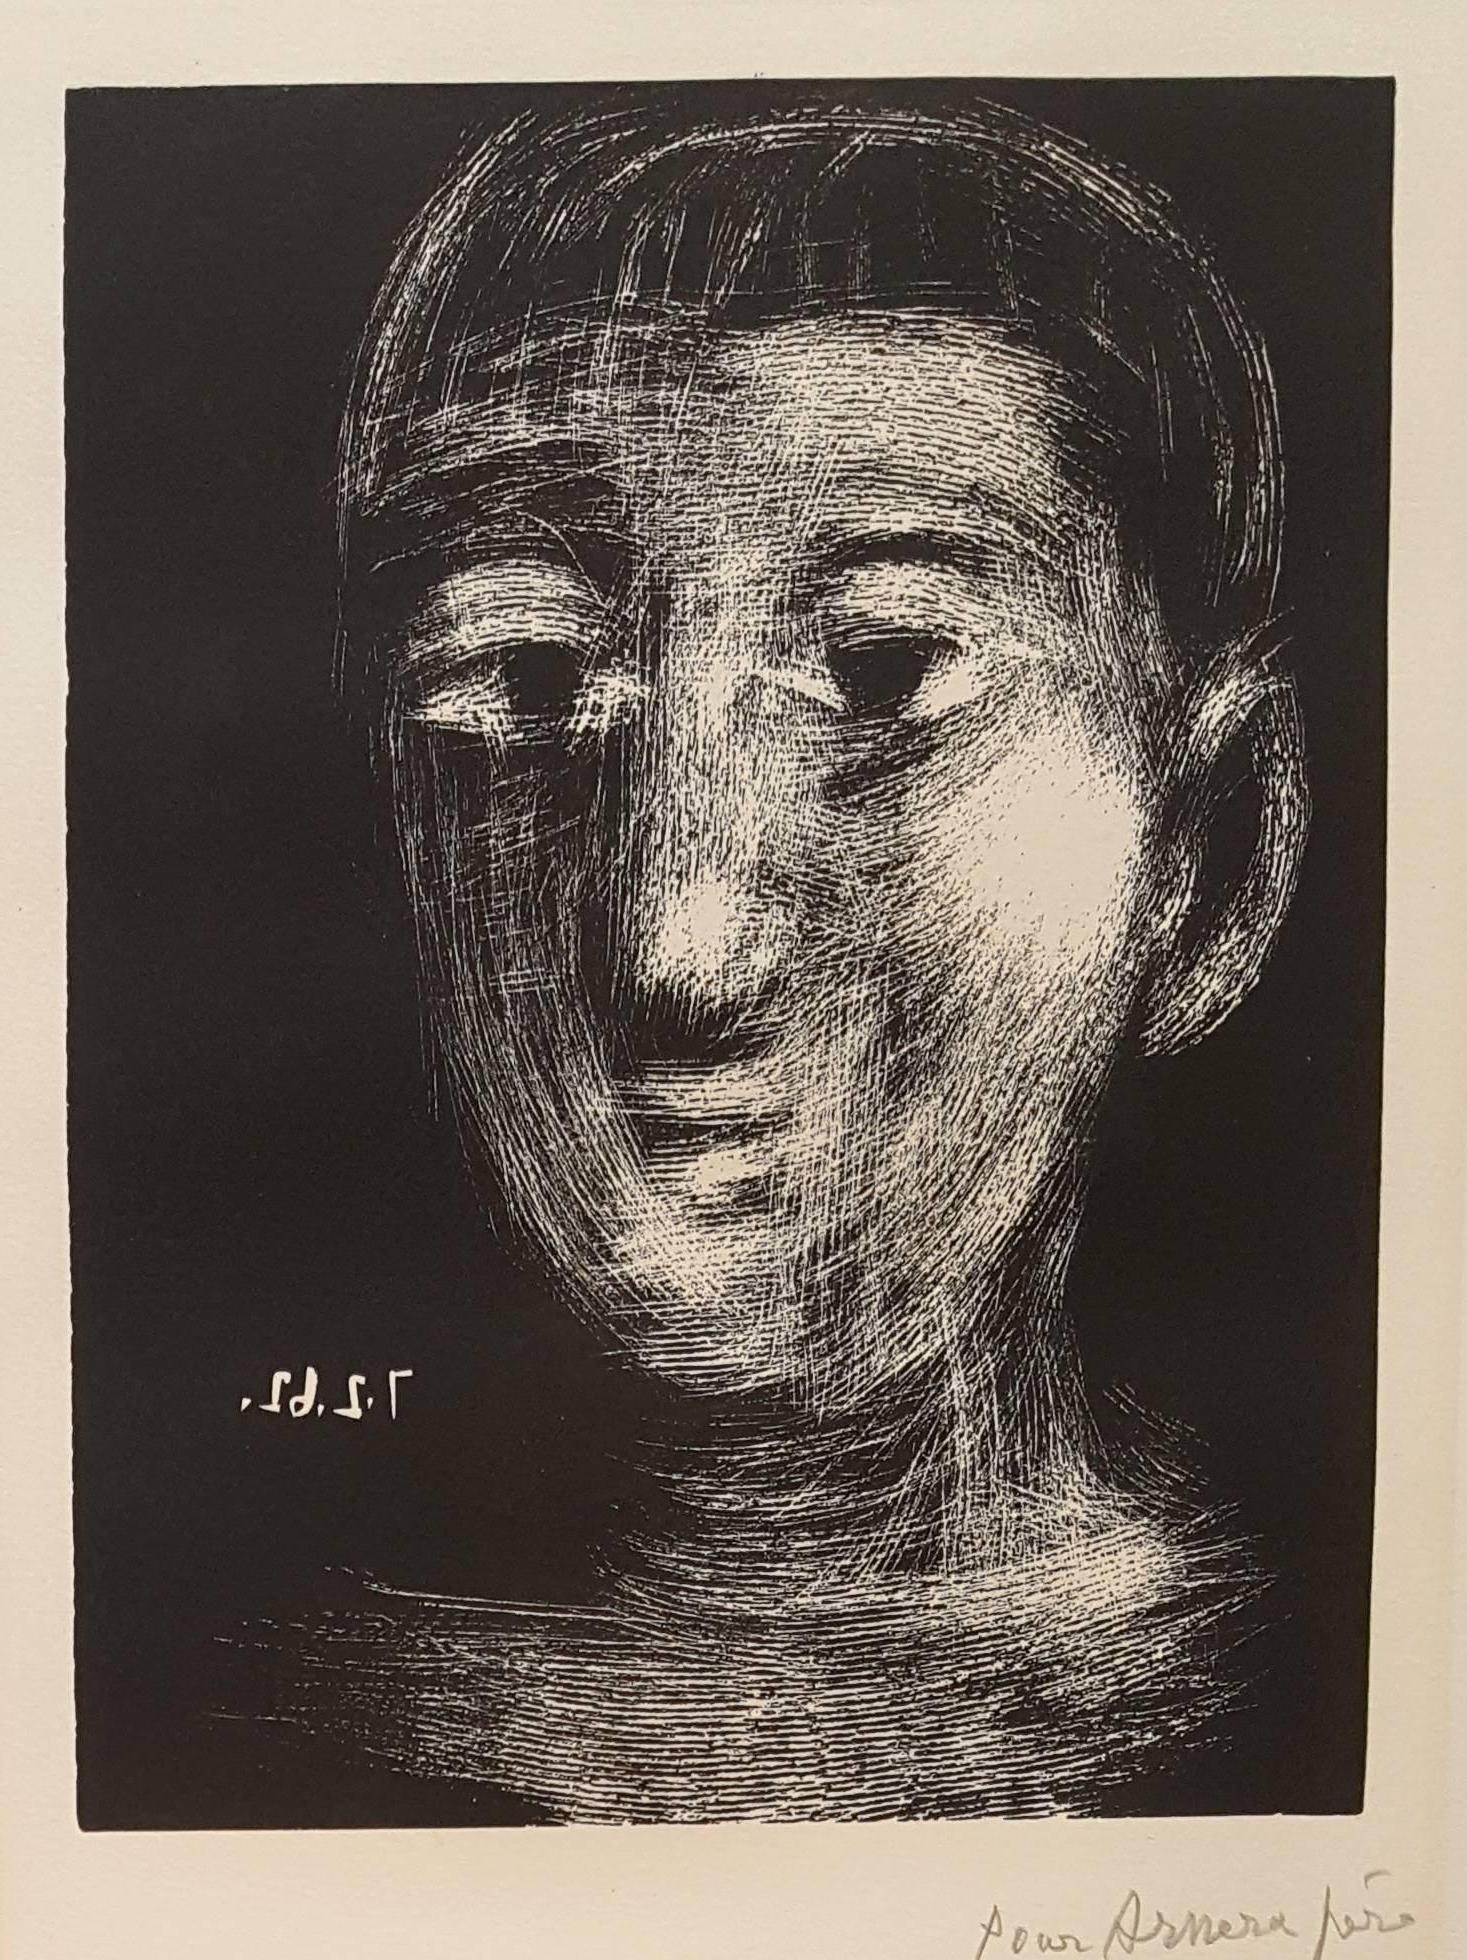 Boy's Head - Original Etching Handsigned - 50 copies - Print by Pablo Picasso